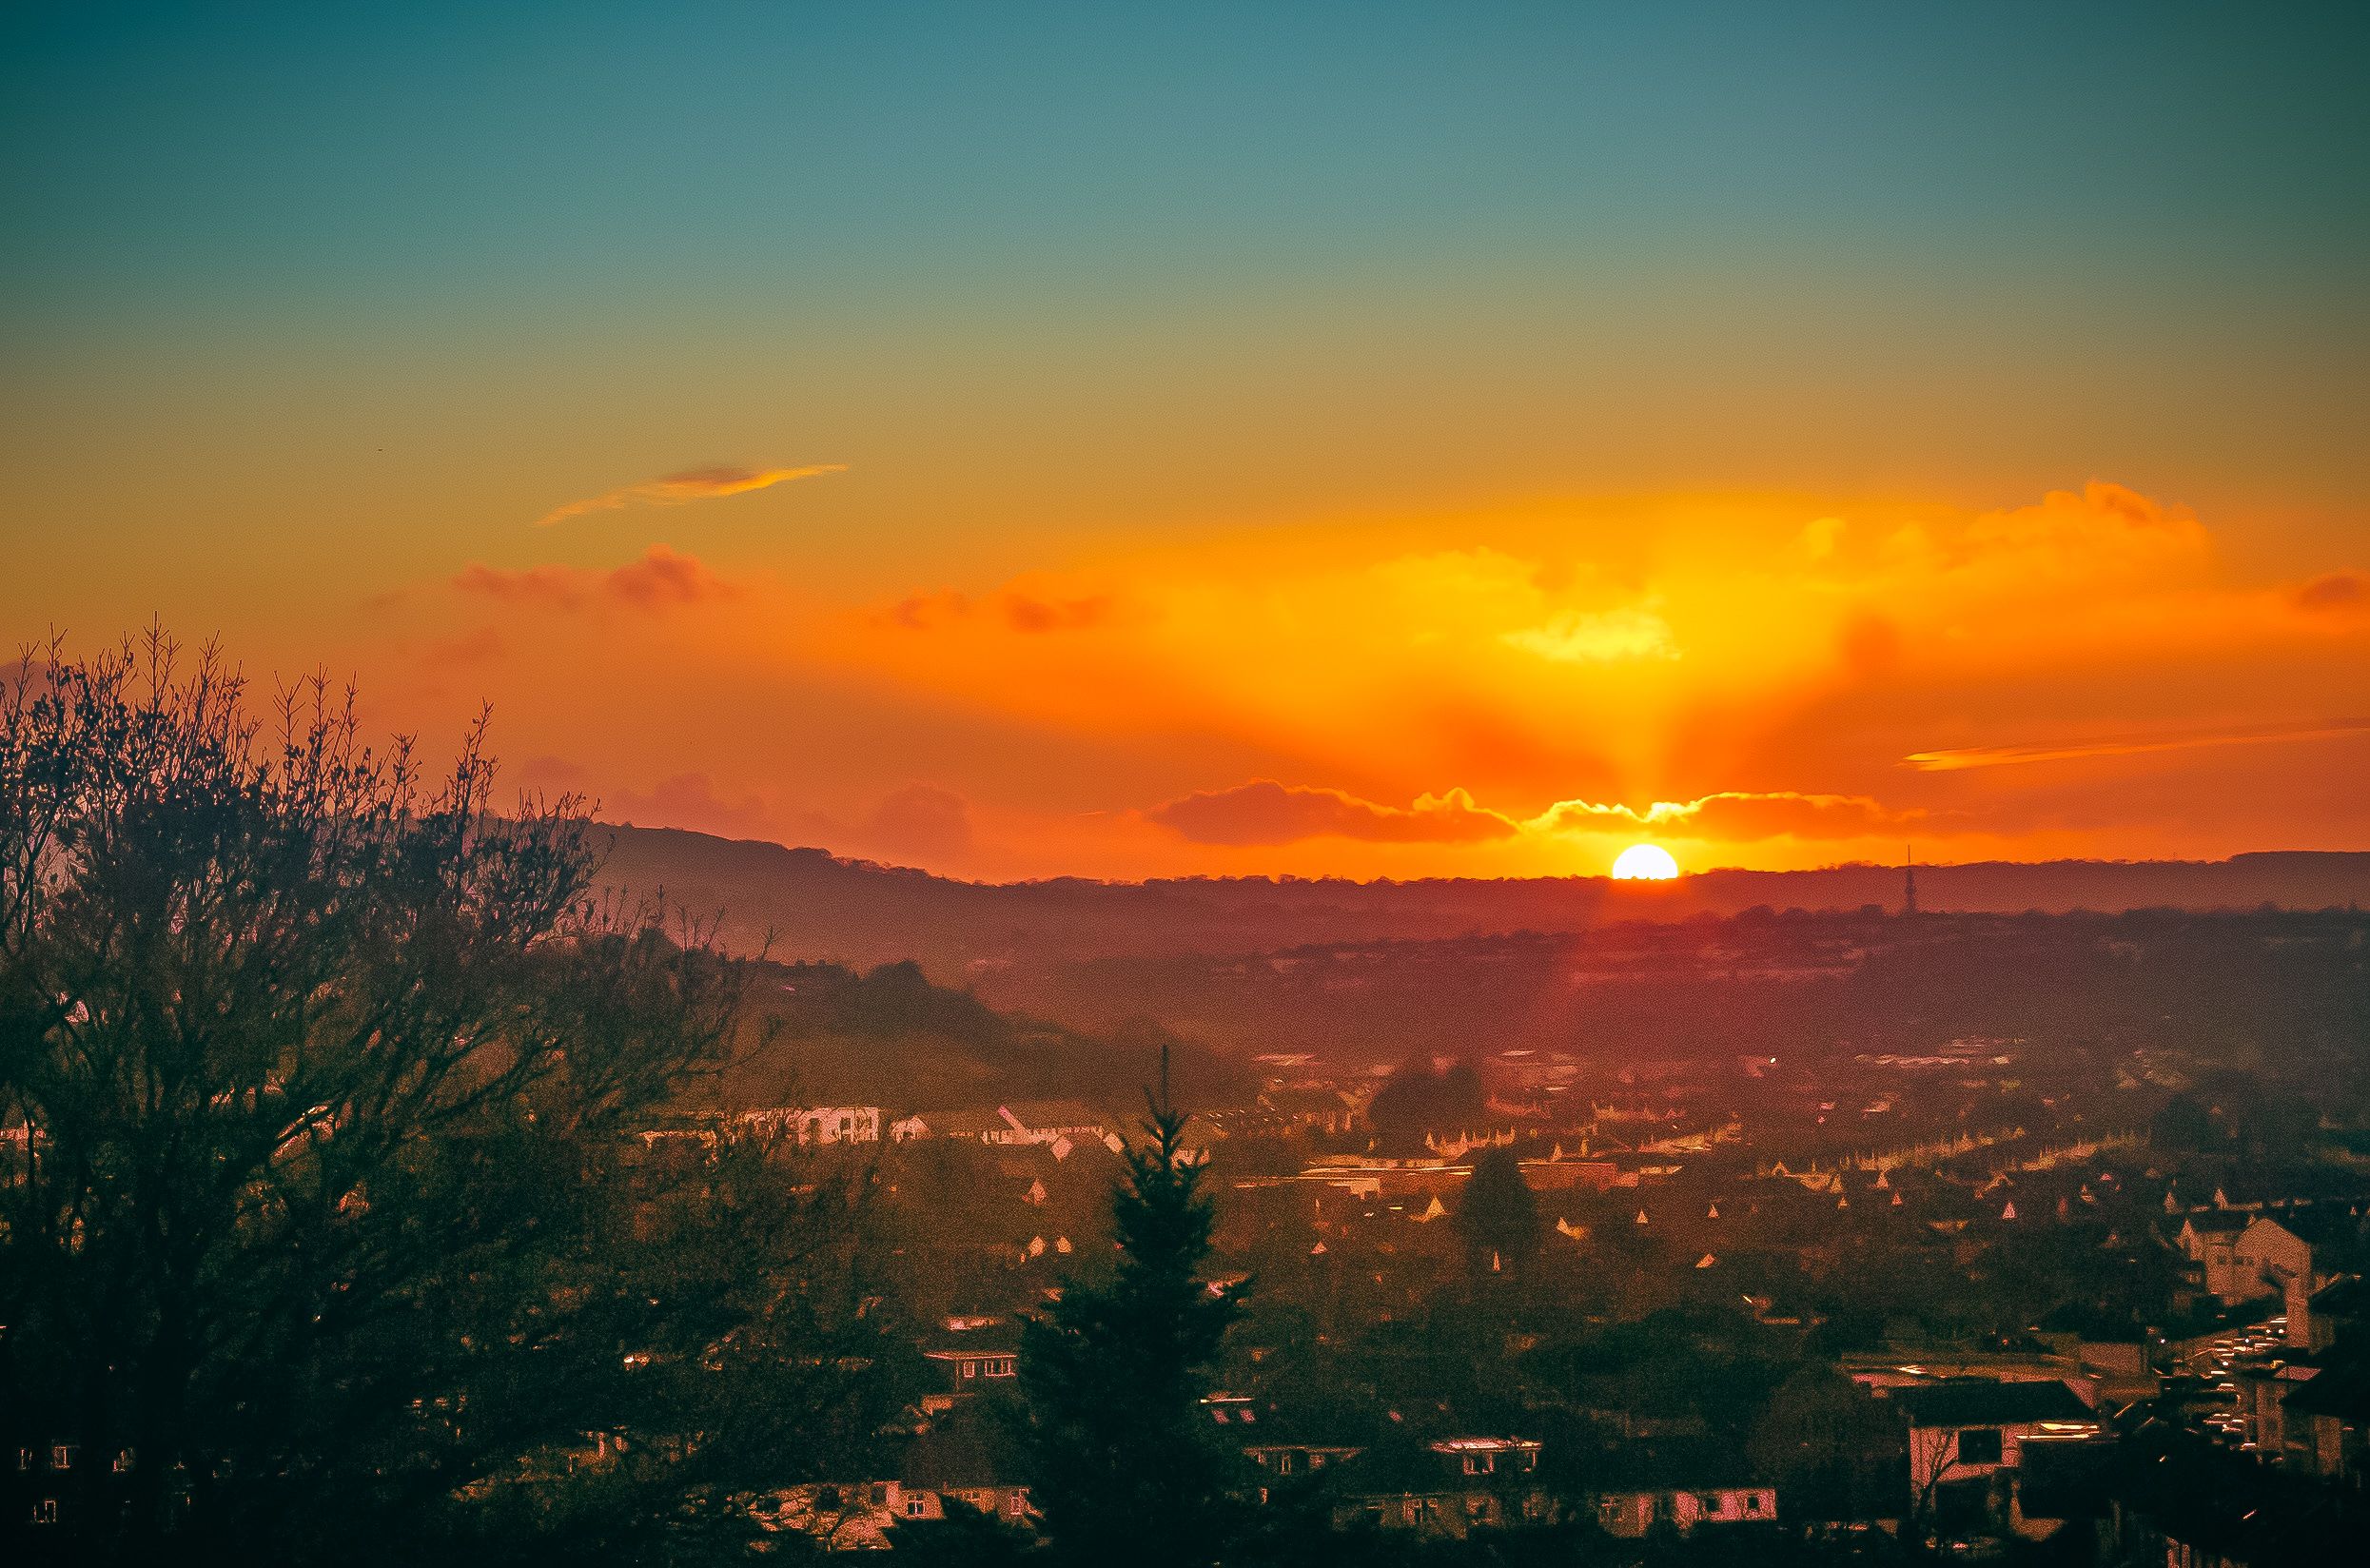 Sunset over the city of Bristol